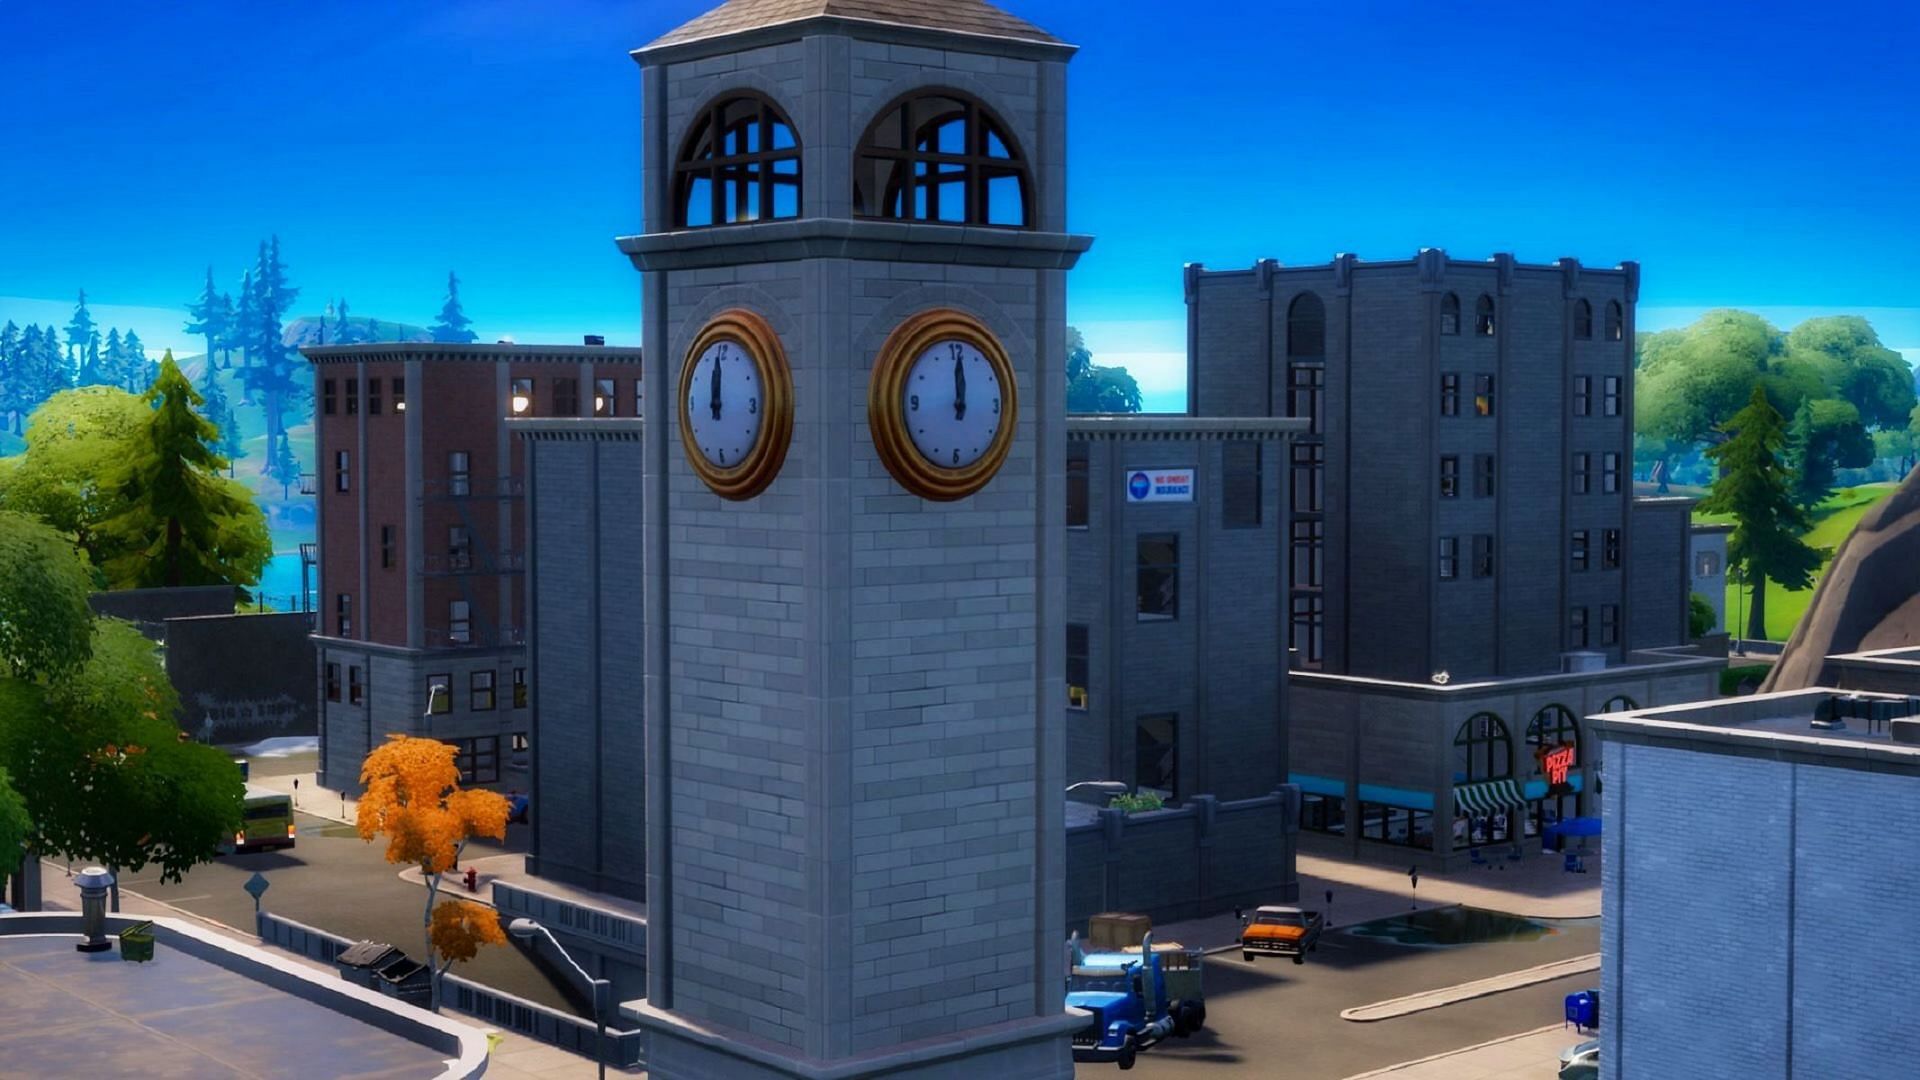 Will Tilted Towers make it to Fortnite Chapter 3 Season 2? (Image Twitter/Michael610YT)